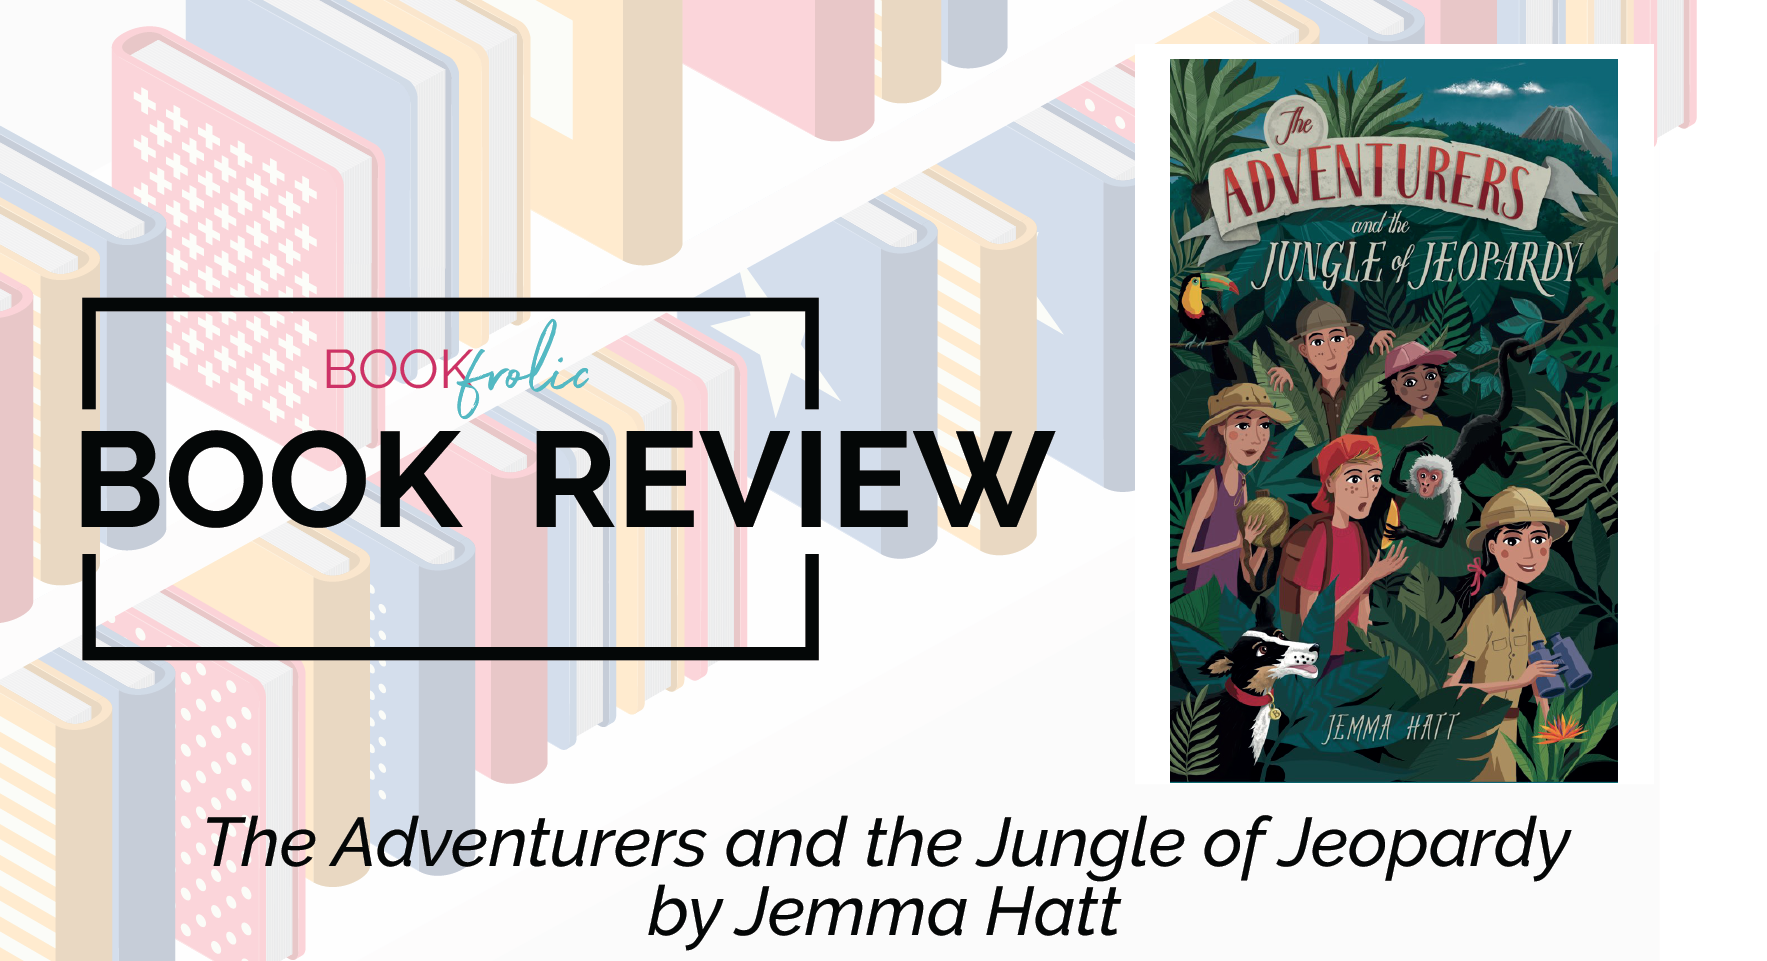 The Adventurers and the Jungle of Jeopardy by Jemma Hatt